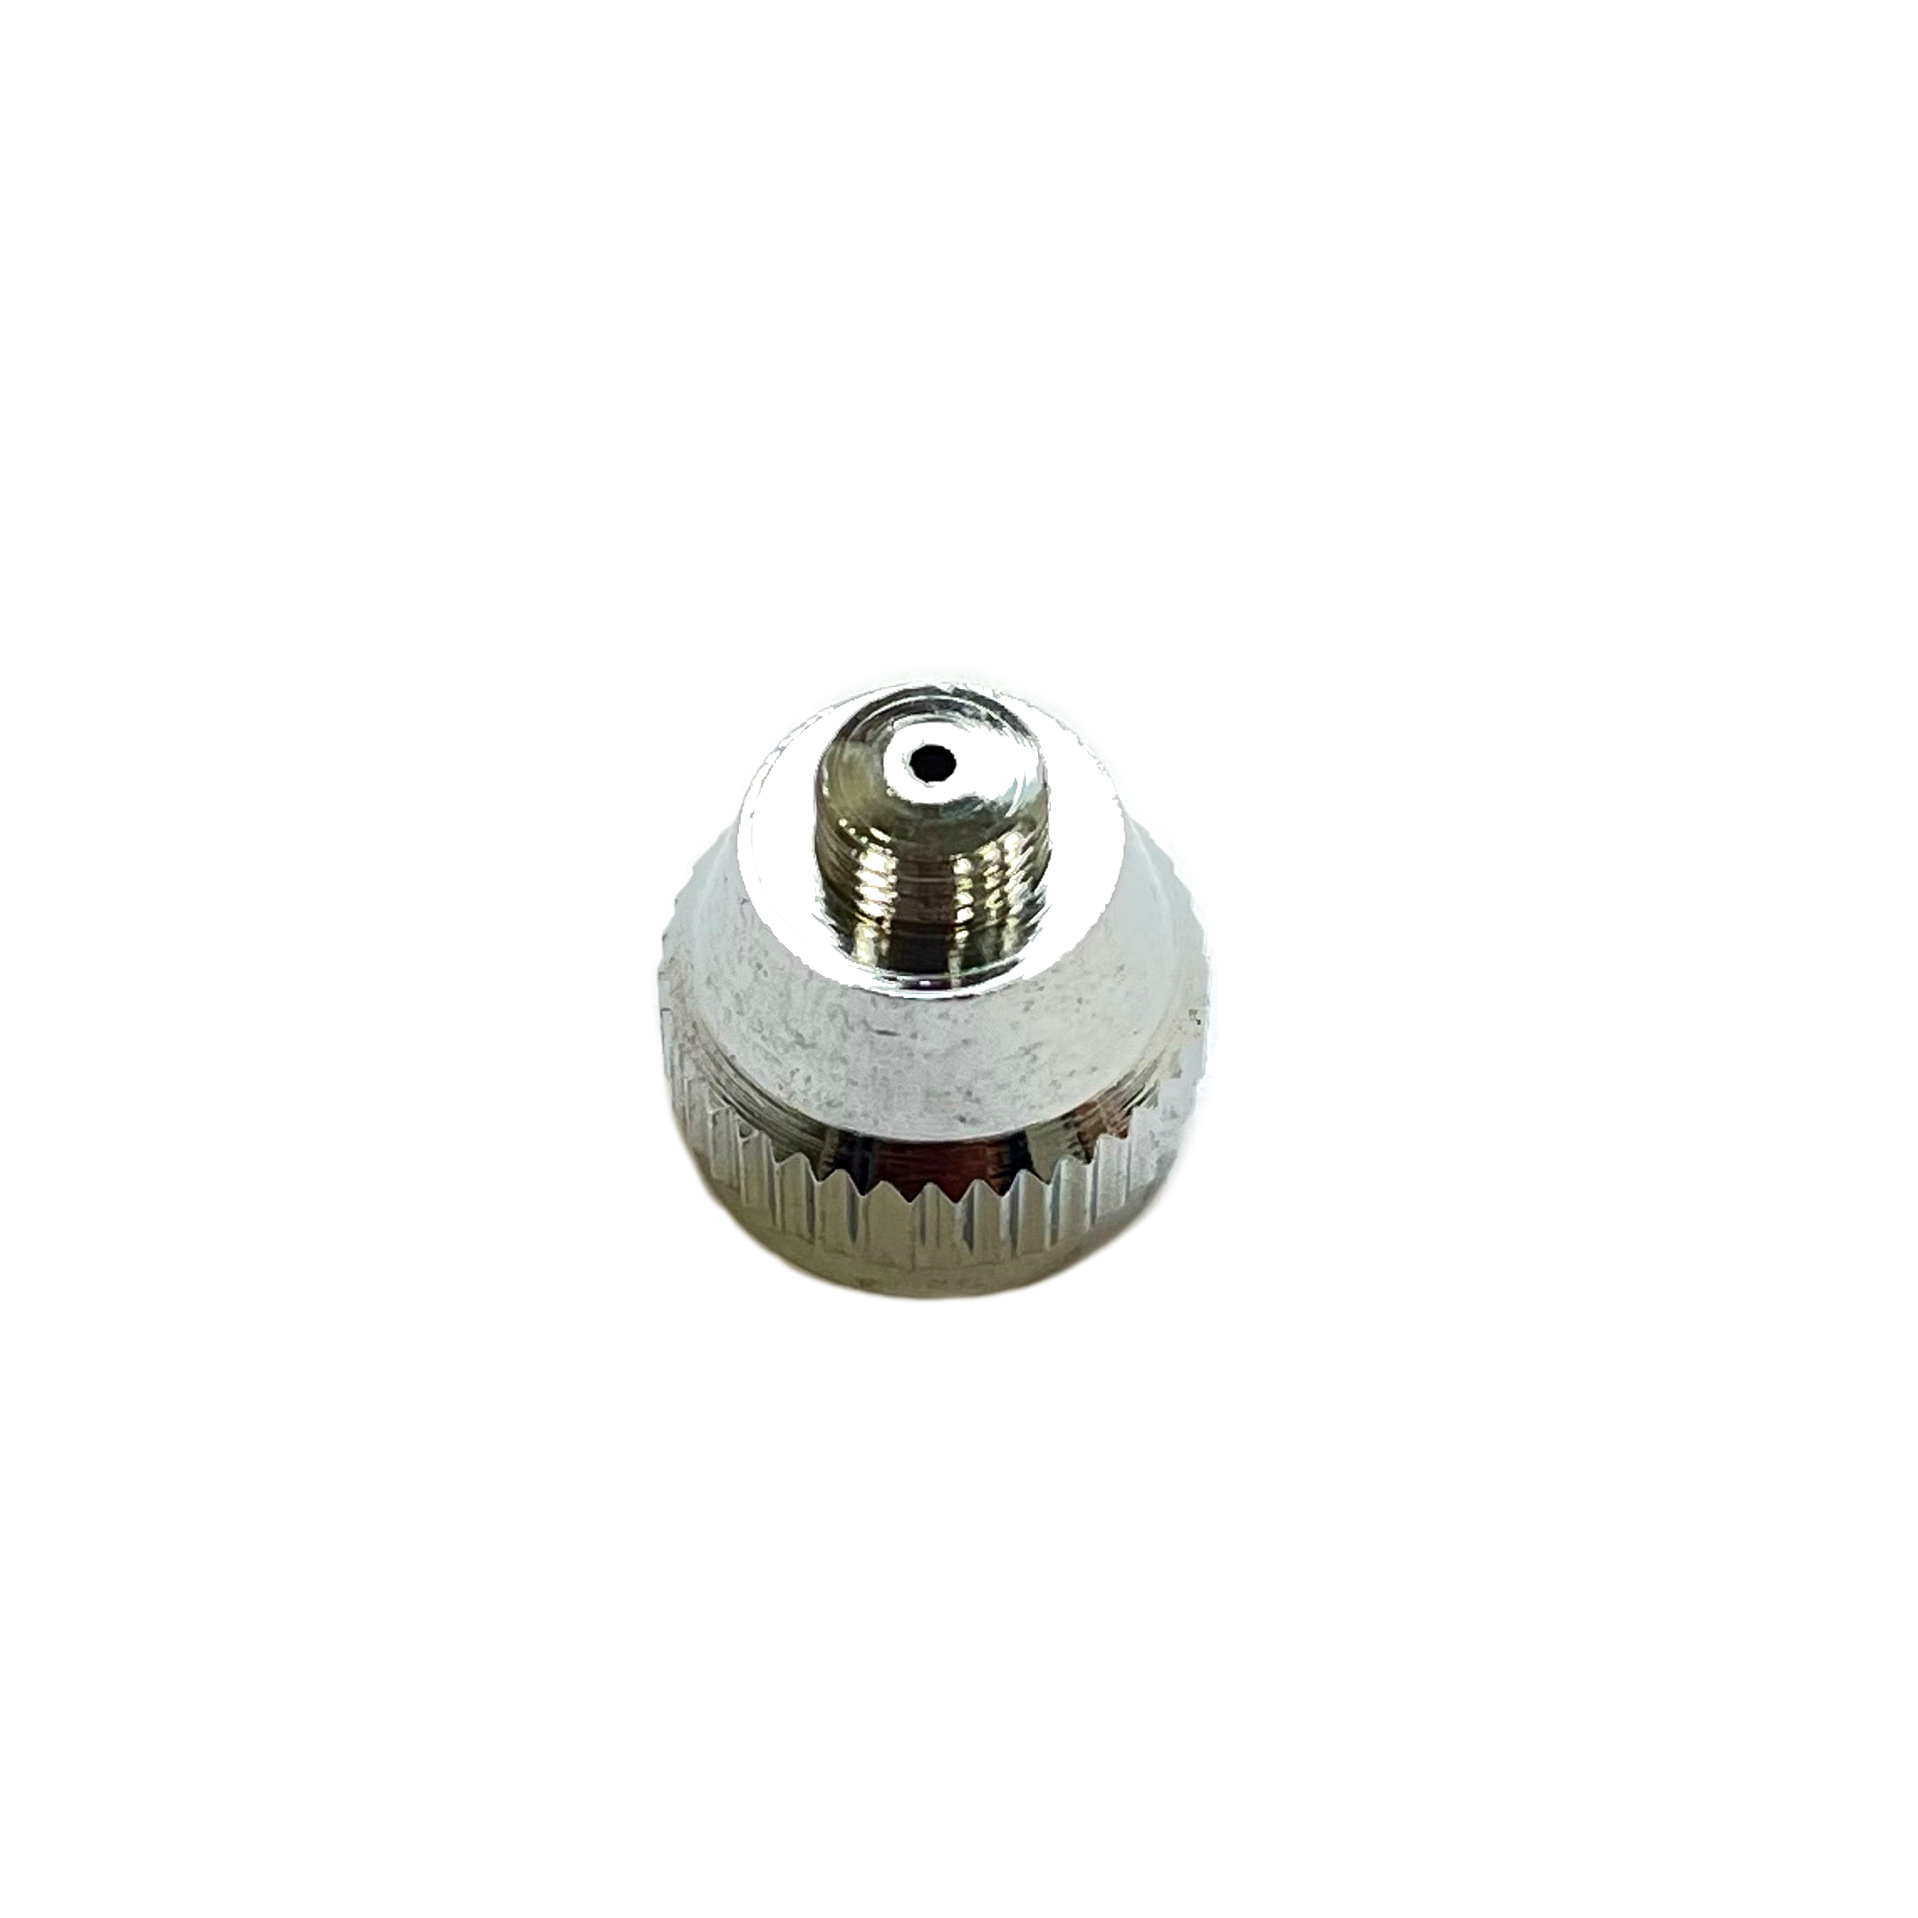 5628 Jas diffuser Housing for airbrush 1126, for nozzle diameter 0.5 mm